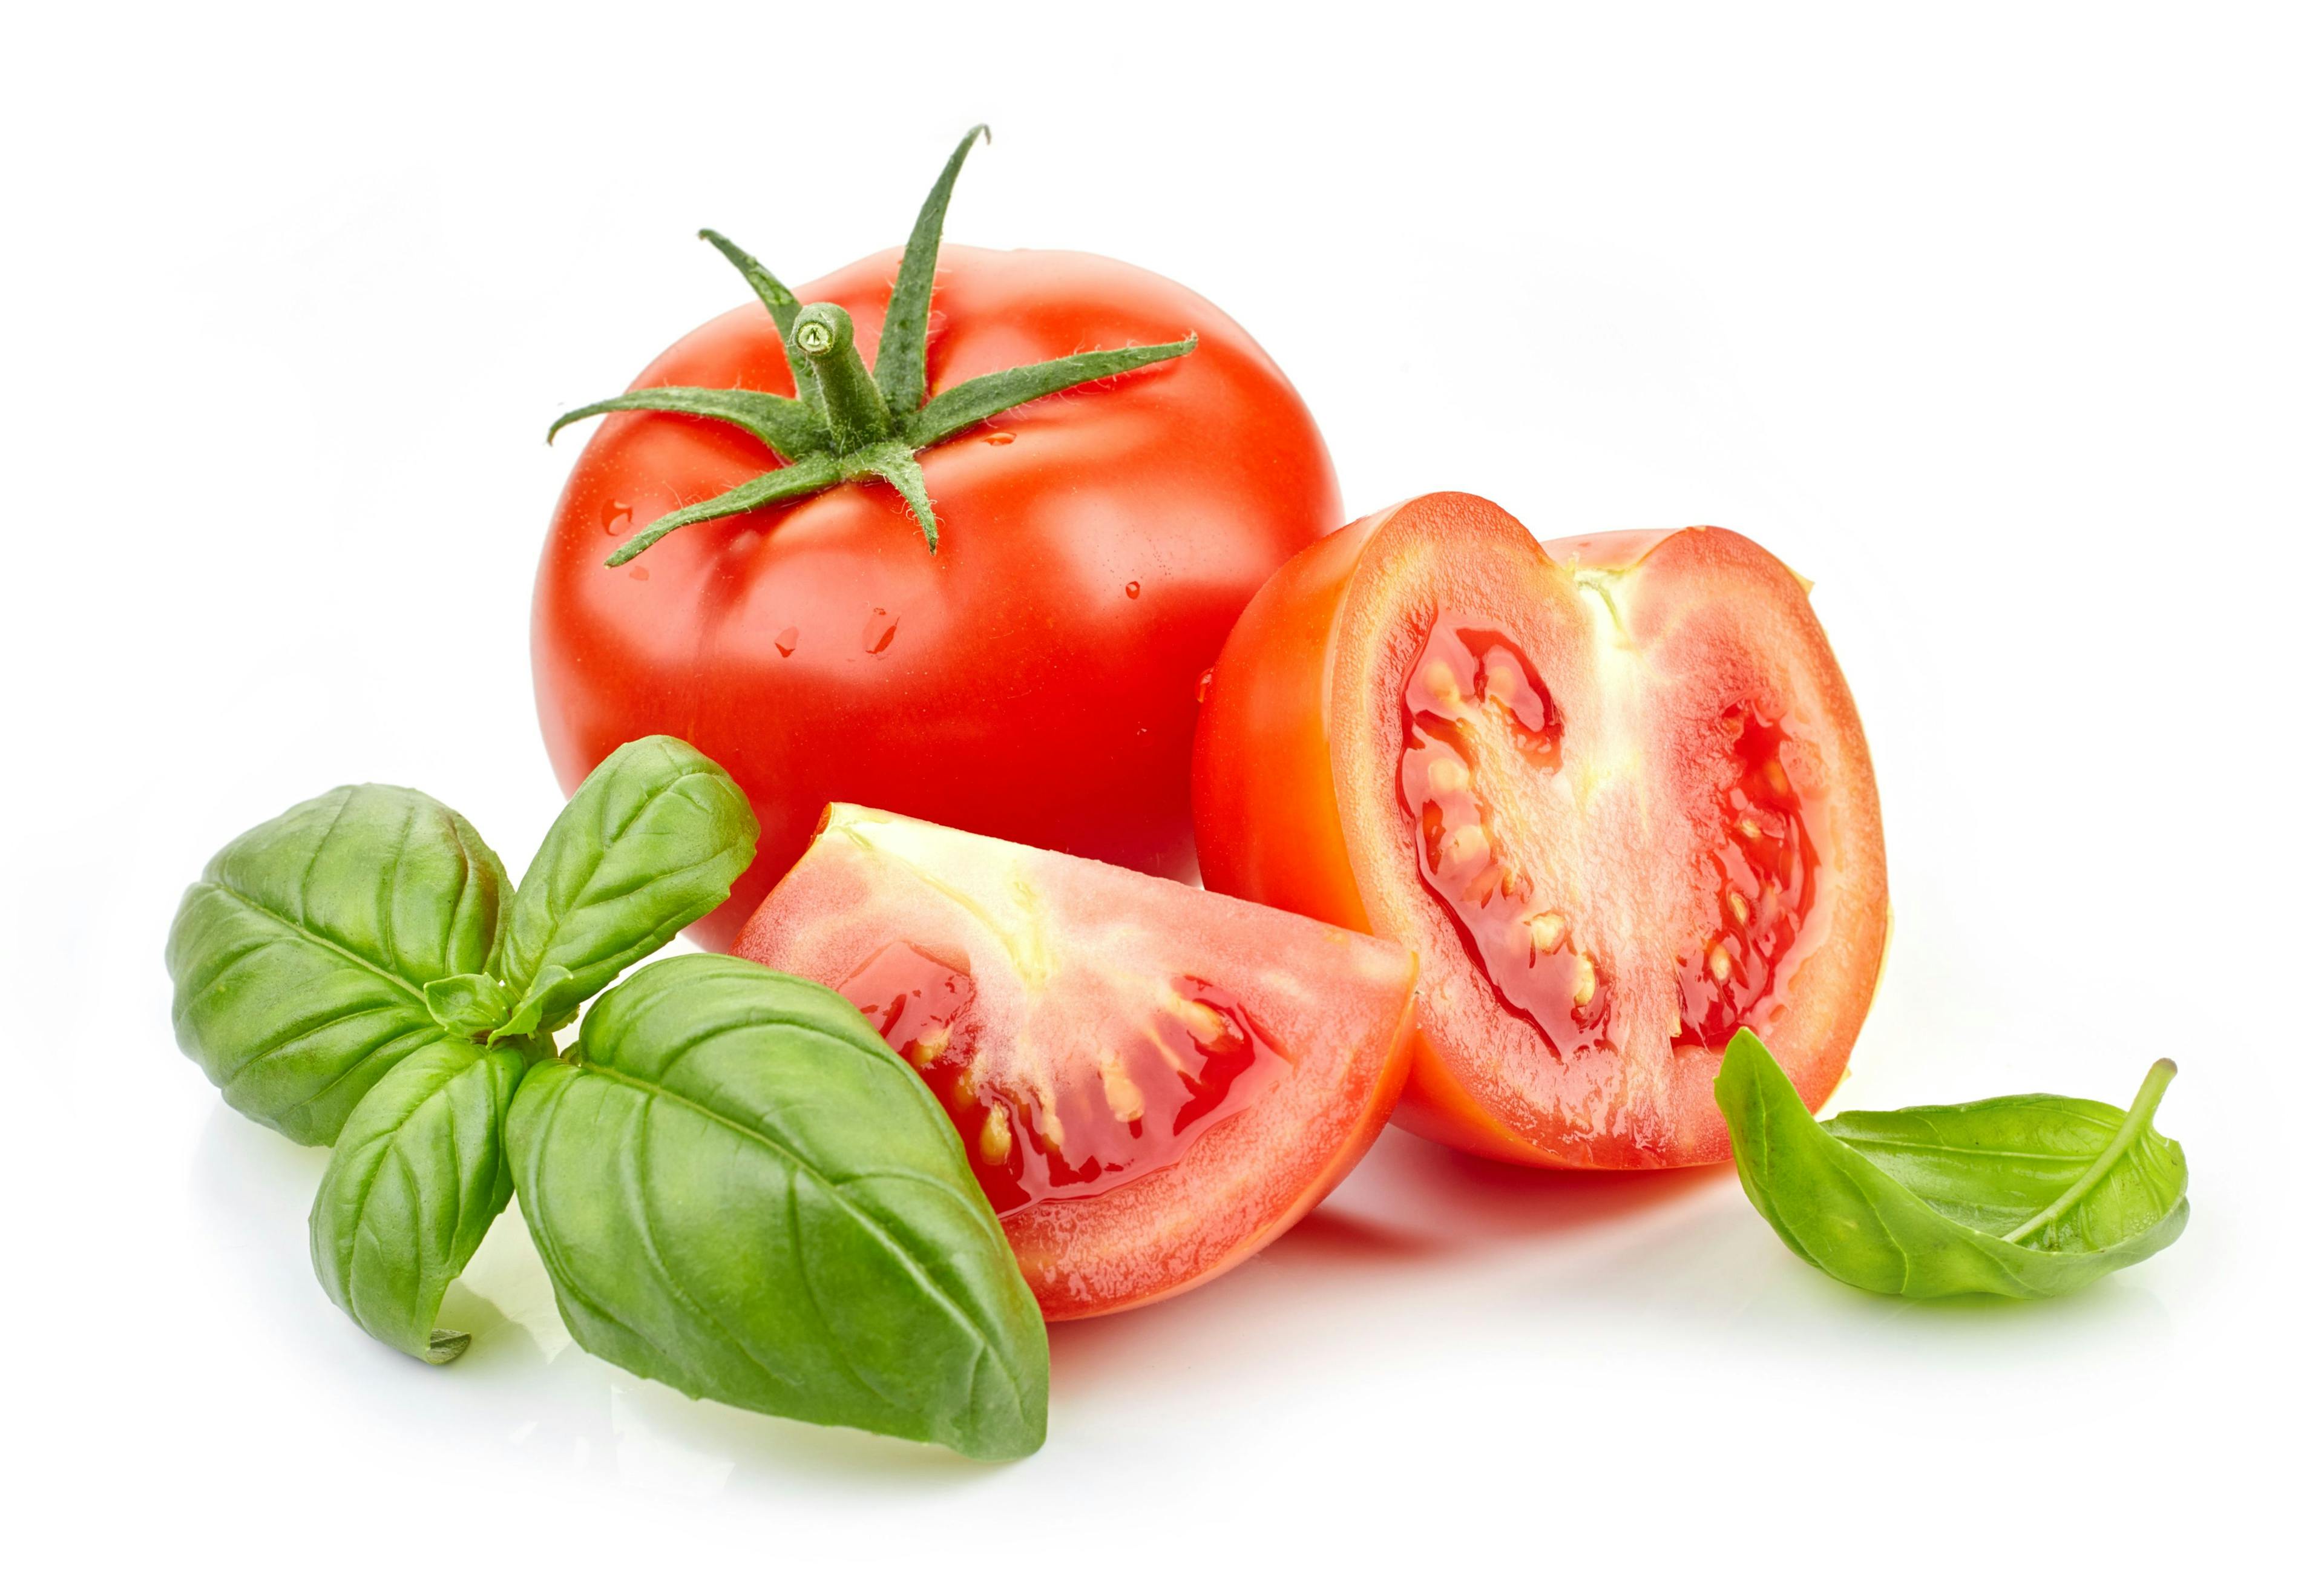 Tomato Concentrate May Help Reduce Chronic Intestinal Inflammation Associated With HIV